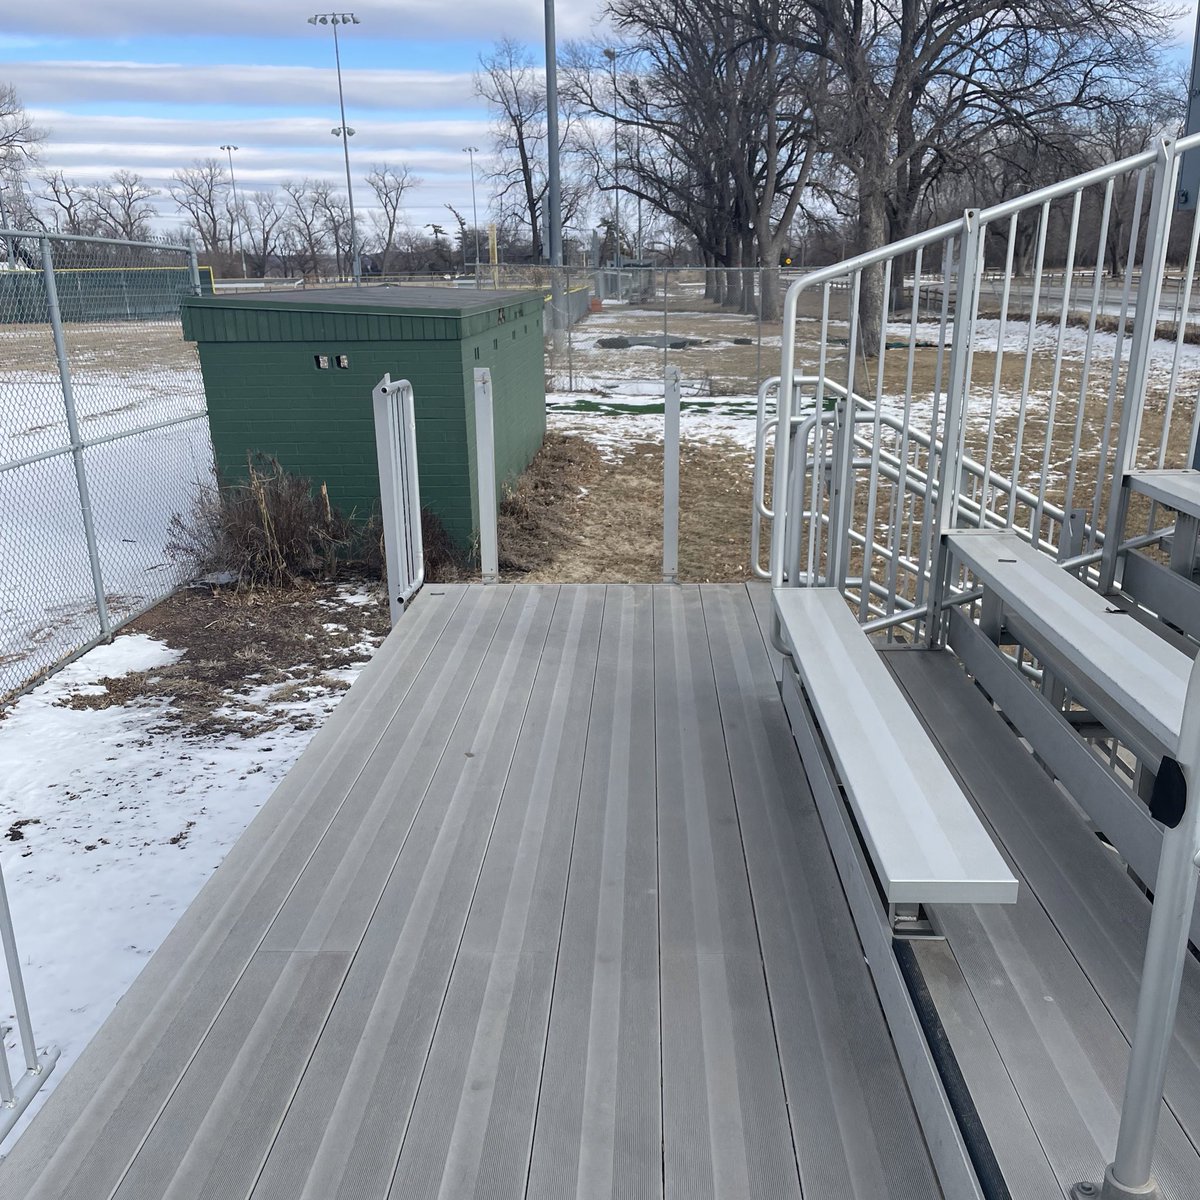 #NorthOCrime: @OmahaPubSchool @OPSCentralHigh / @OmahaOfficial @OmahaParks Boyd Baseball Complex, home to @OPSCHSBSB Team, has been significantly vandalized. Please contact @OmahaPolice with information to this crime. 